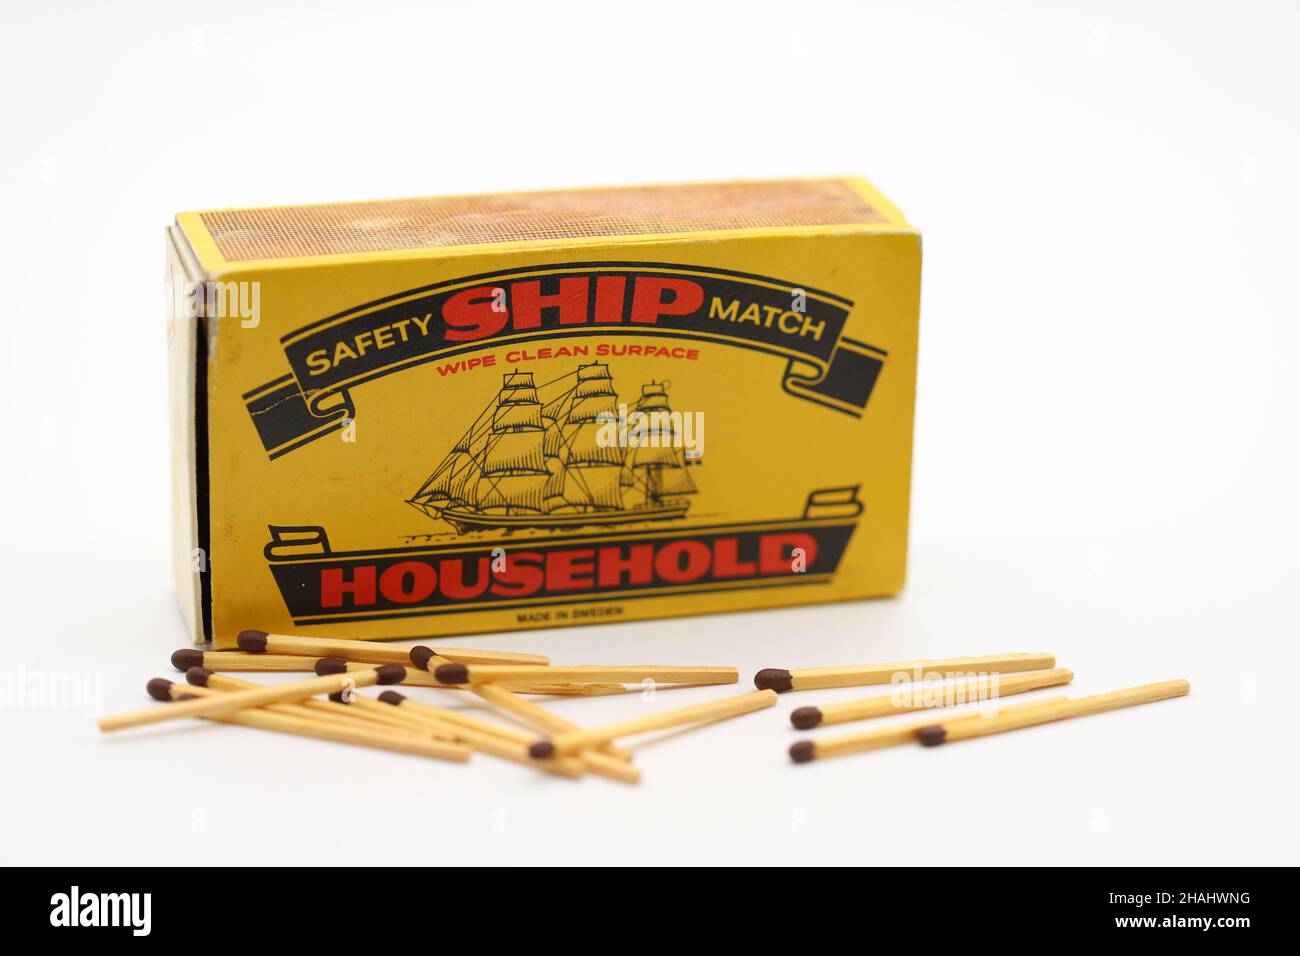 Ship Safety matches for household use. Made in Sweden. Keep away from children. Stock Photo